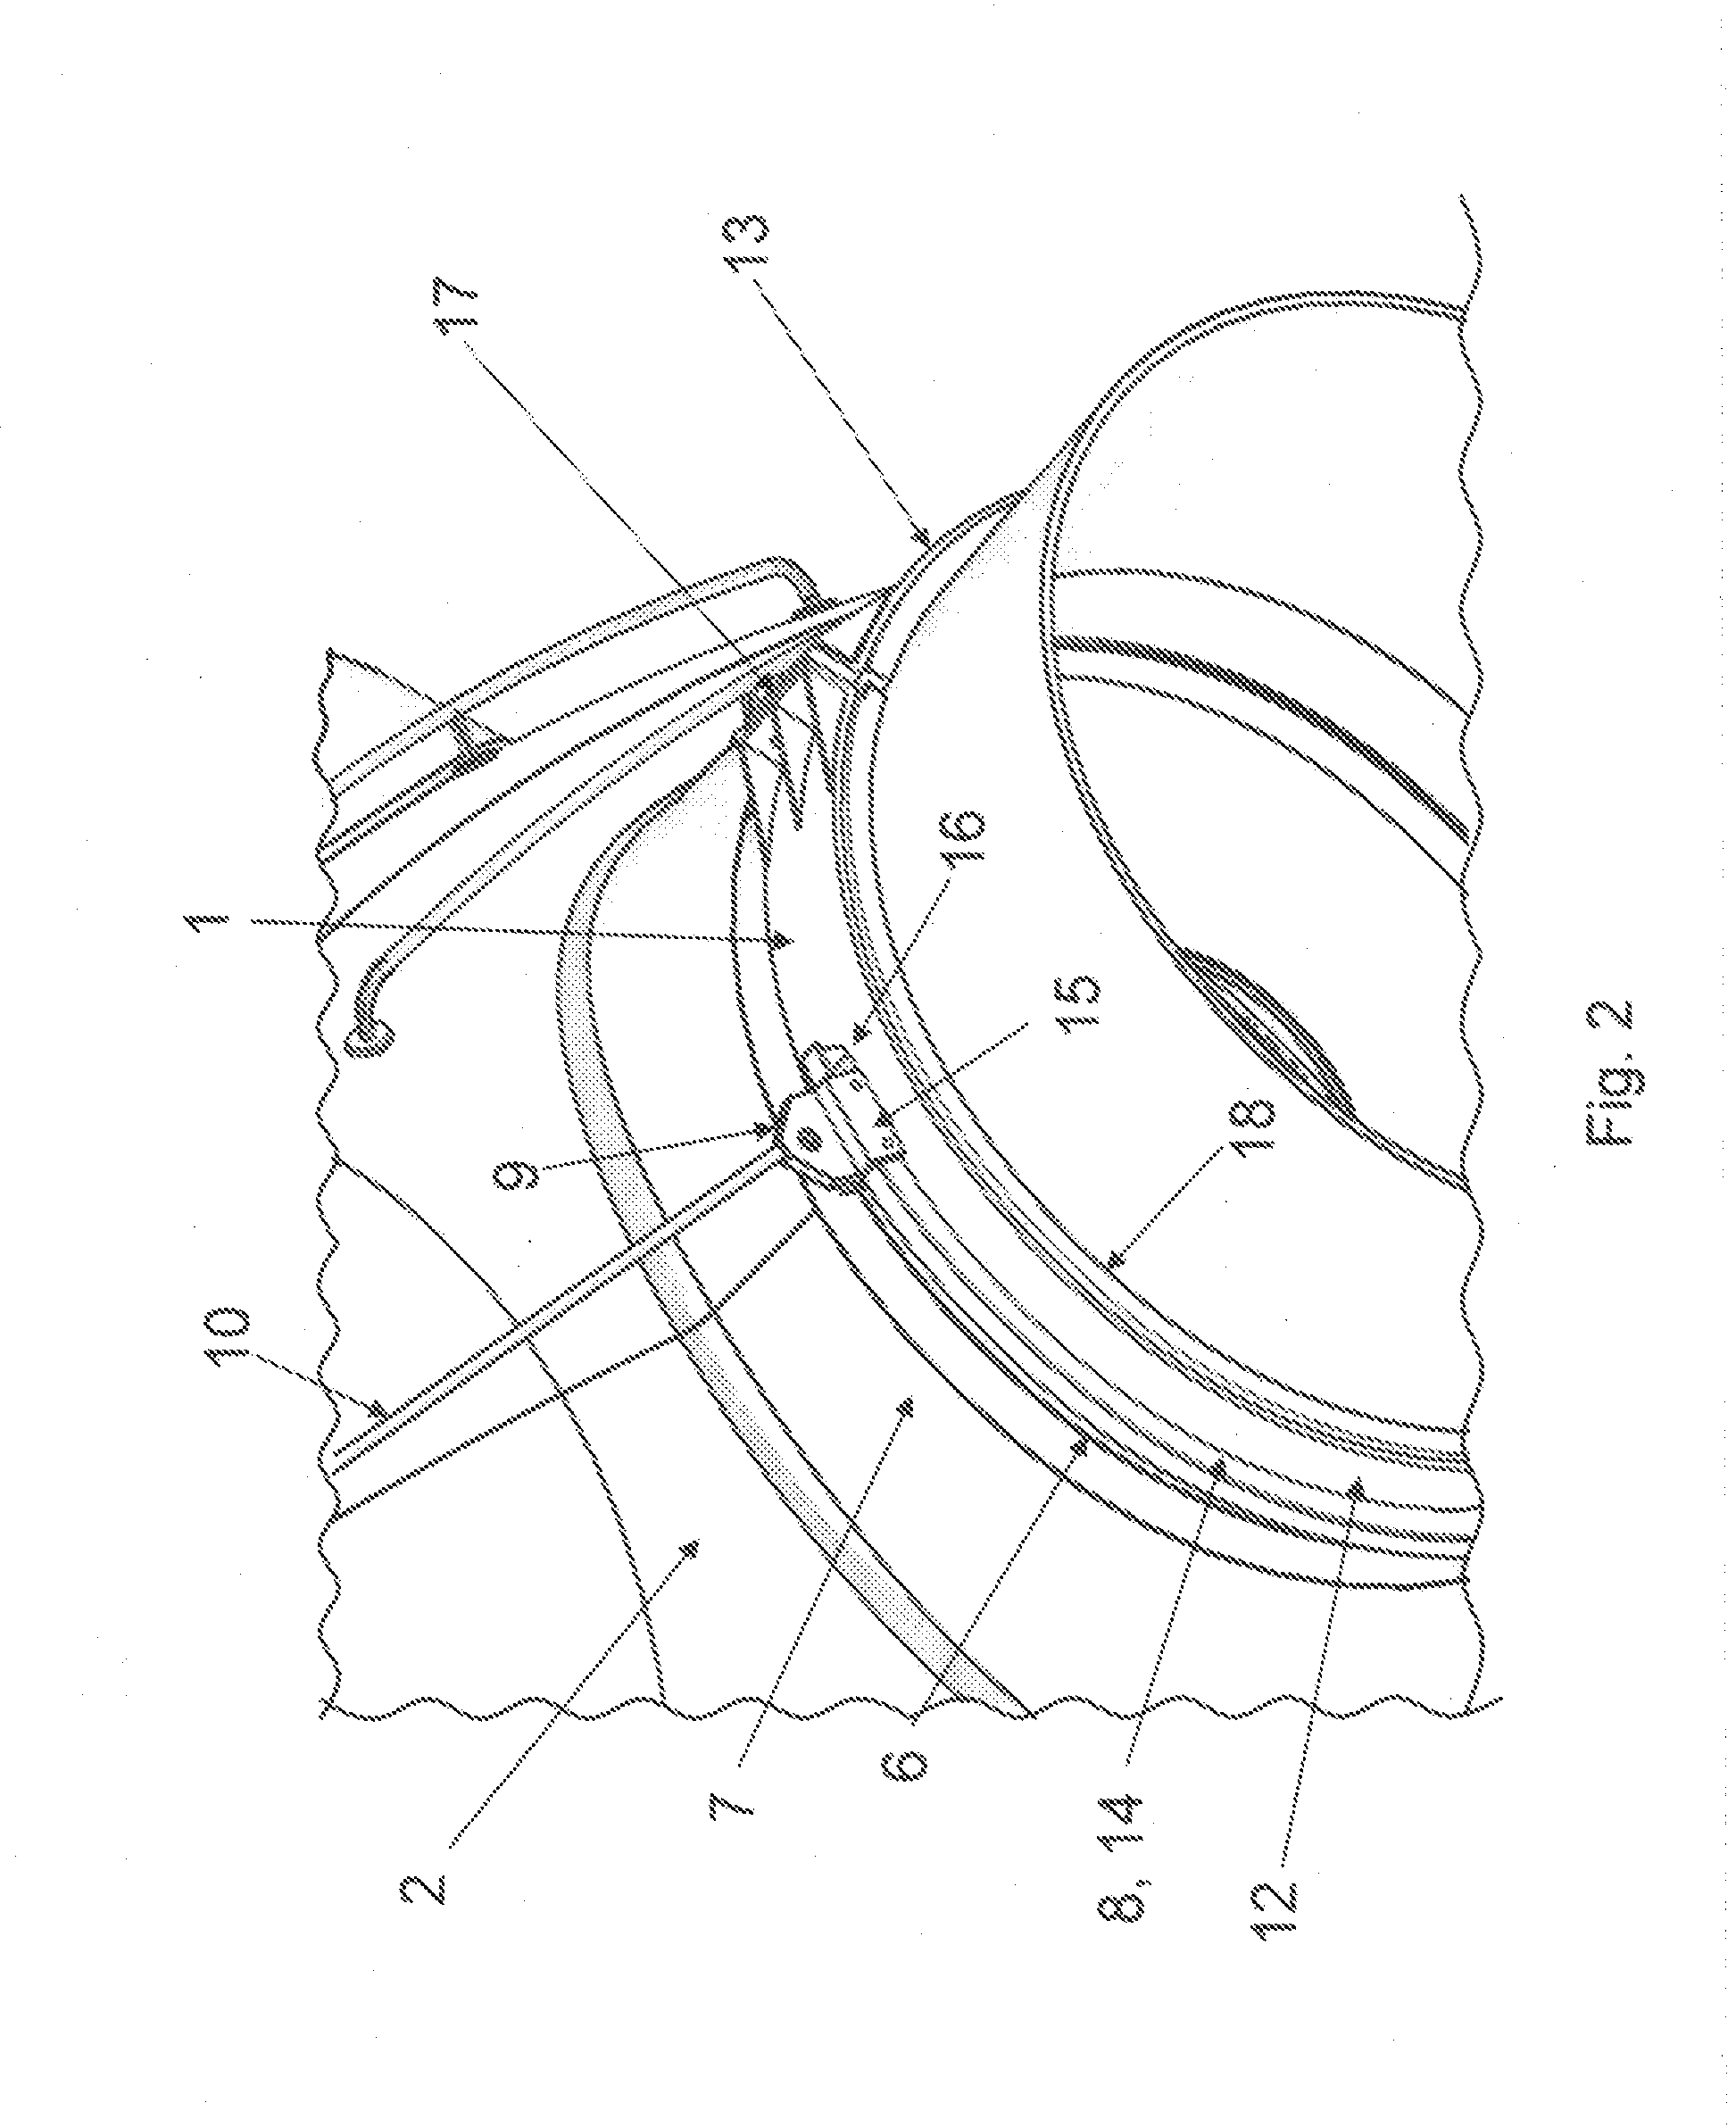 Lifting device for a rotor of a wind turbine